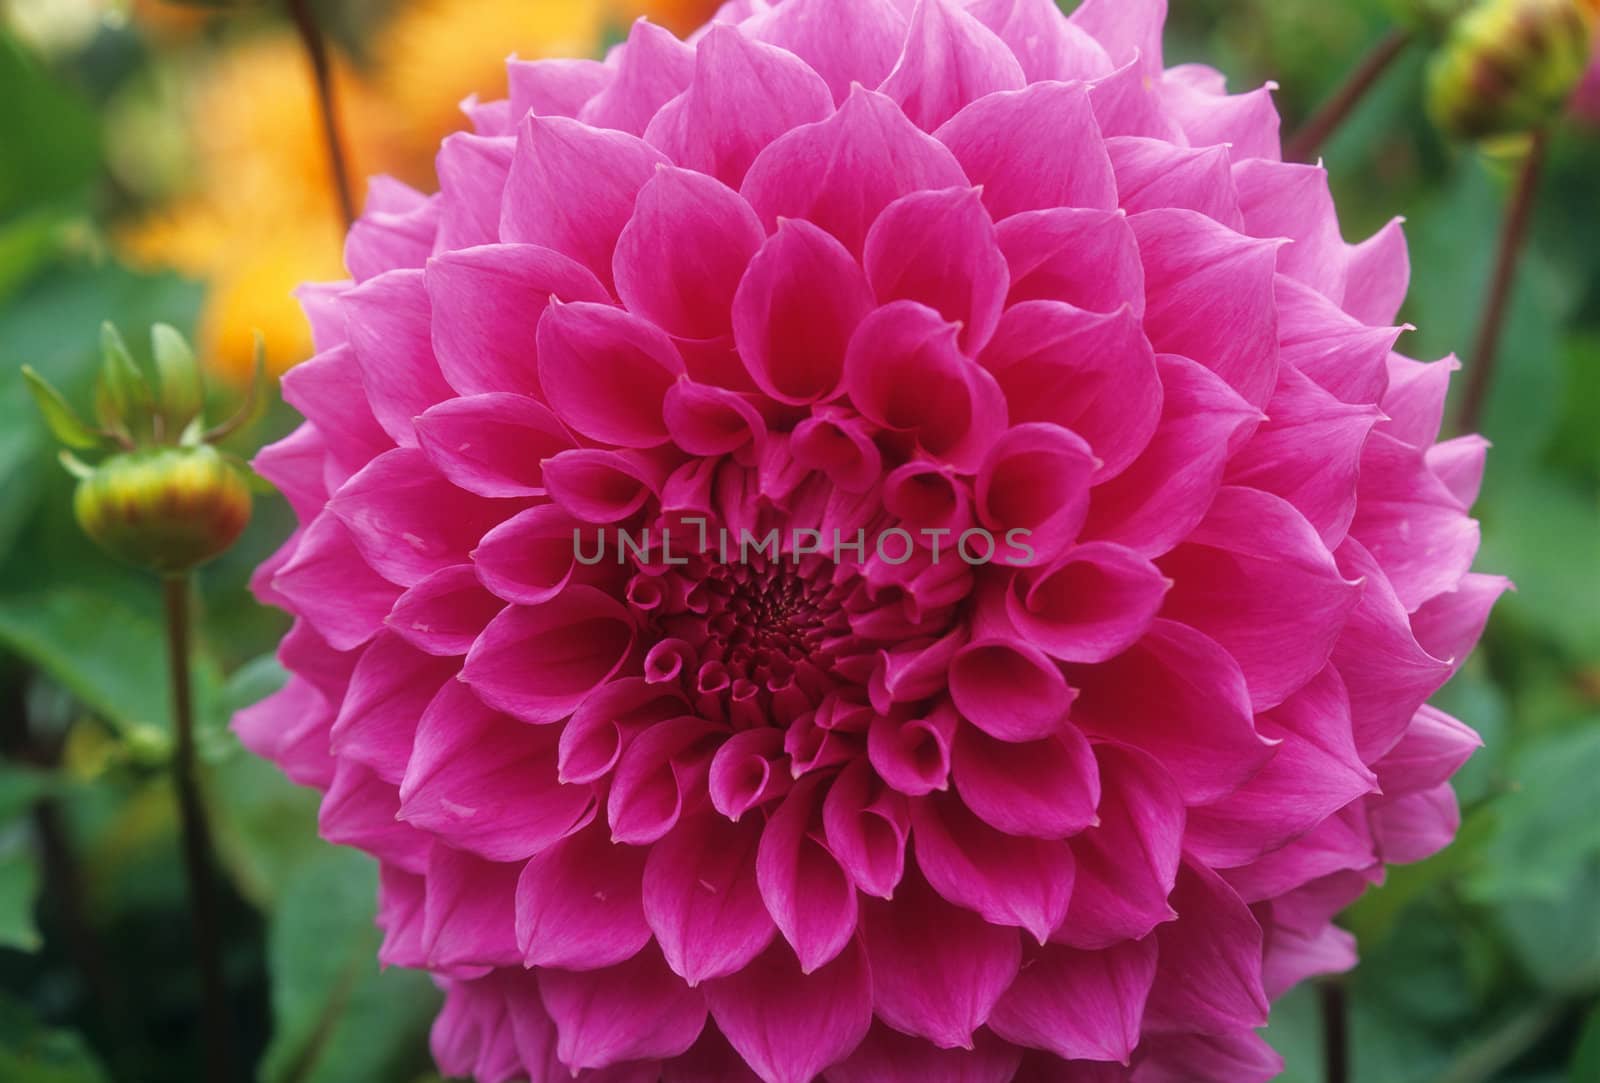 This bright pink dahlia flower was photographed in Eugene, Oregon.